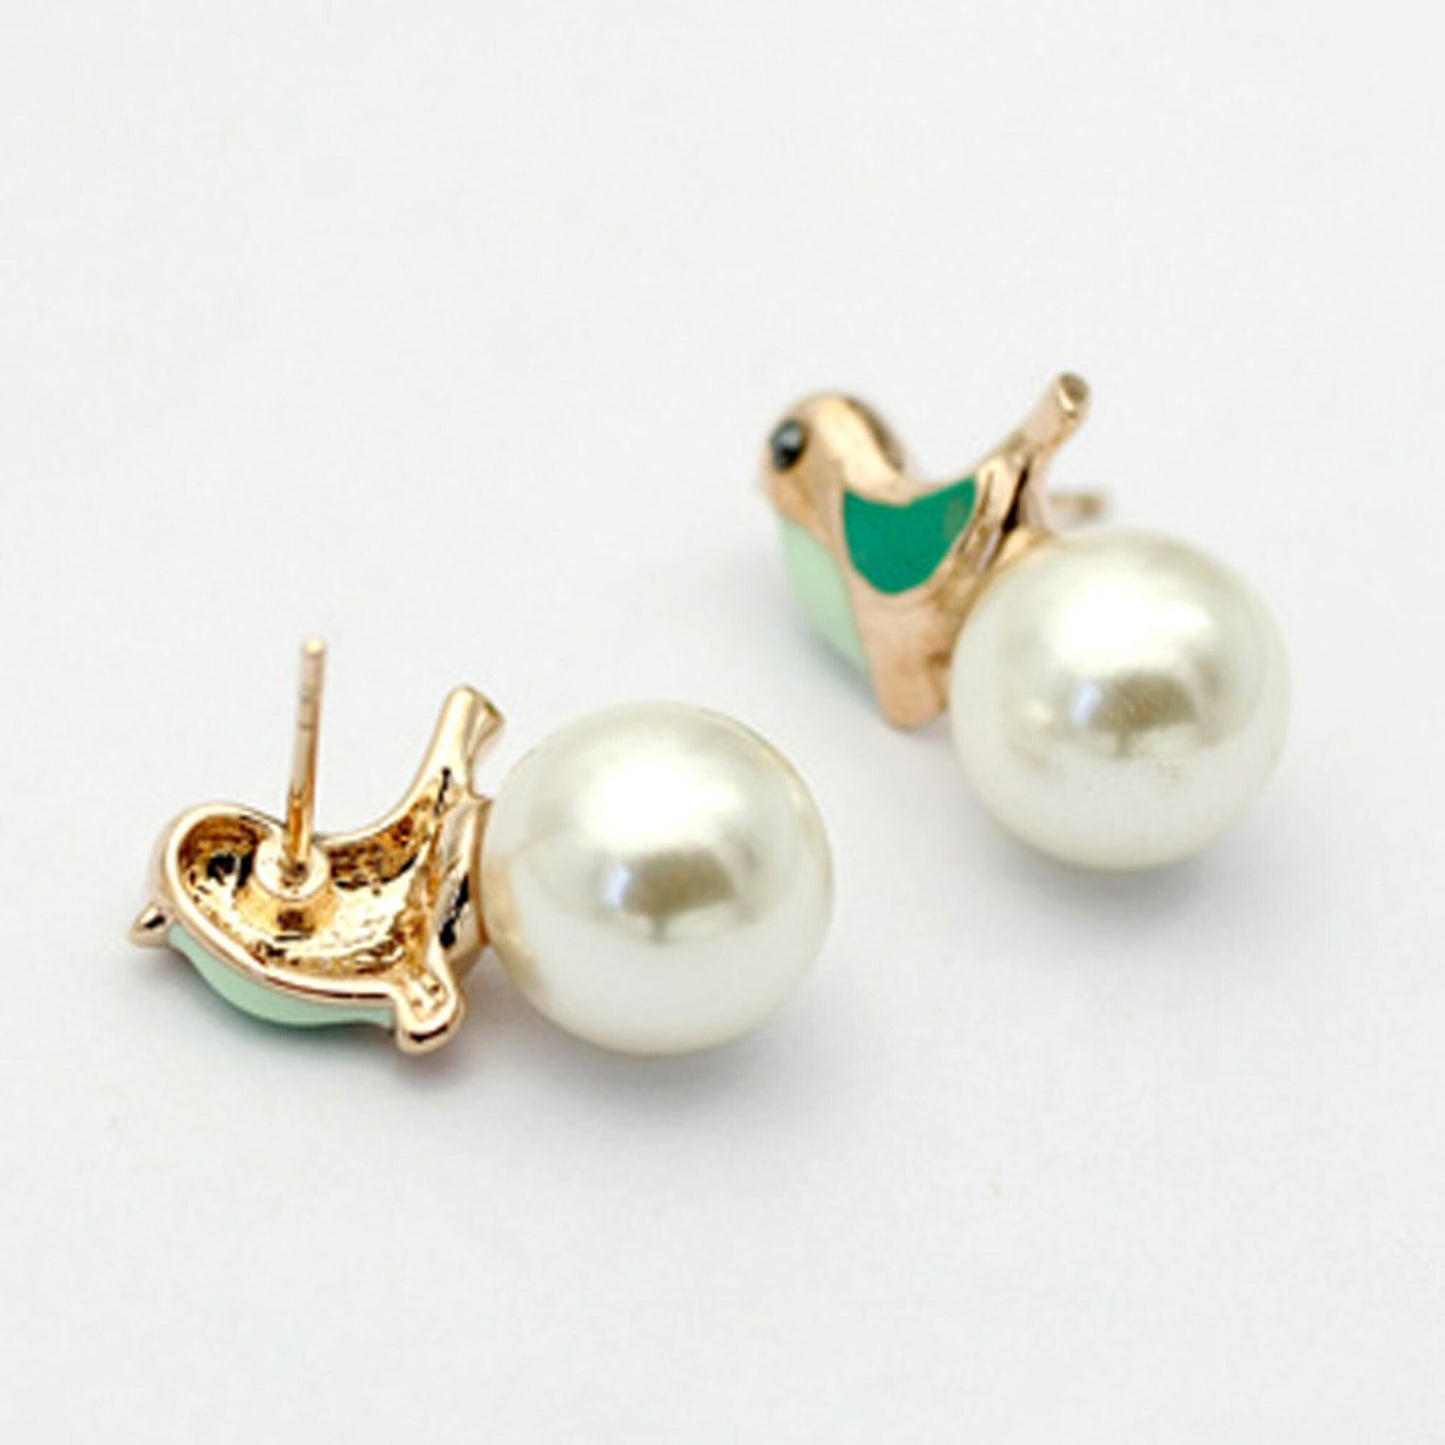 18k Gold Plated And Hand Painted Enamel, Green Bird And Pearl Earrings